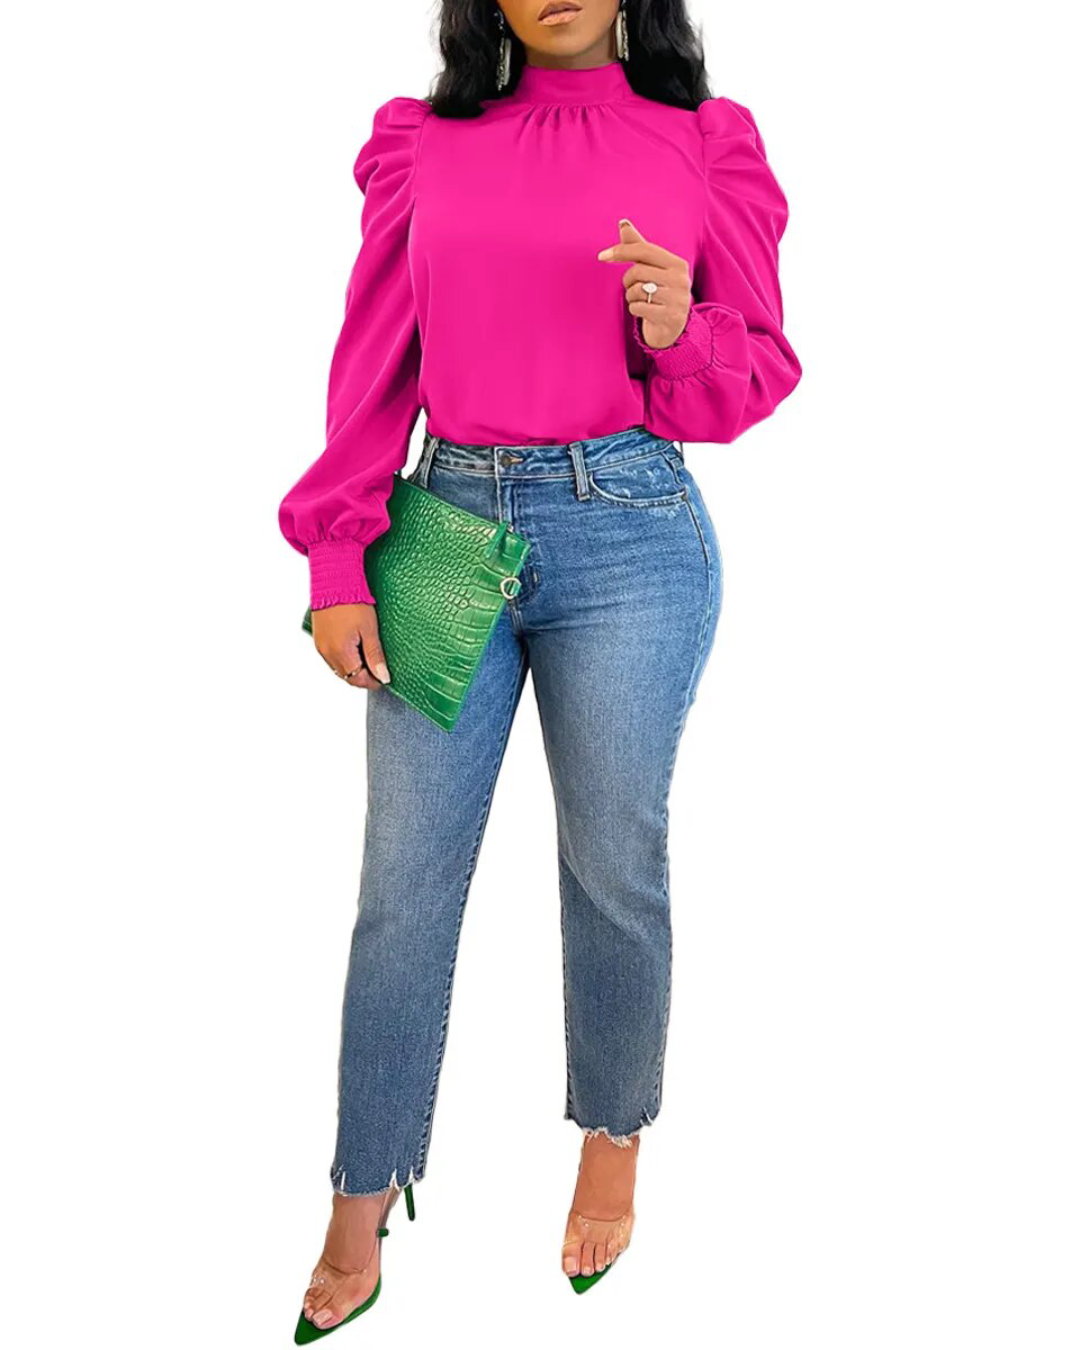 Solid Color Bubble Sleeve Back Lace Up Top Fuchsia S 